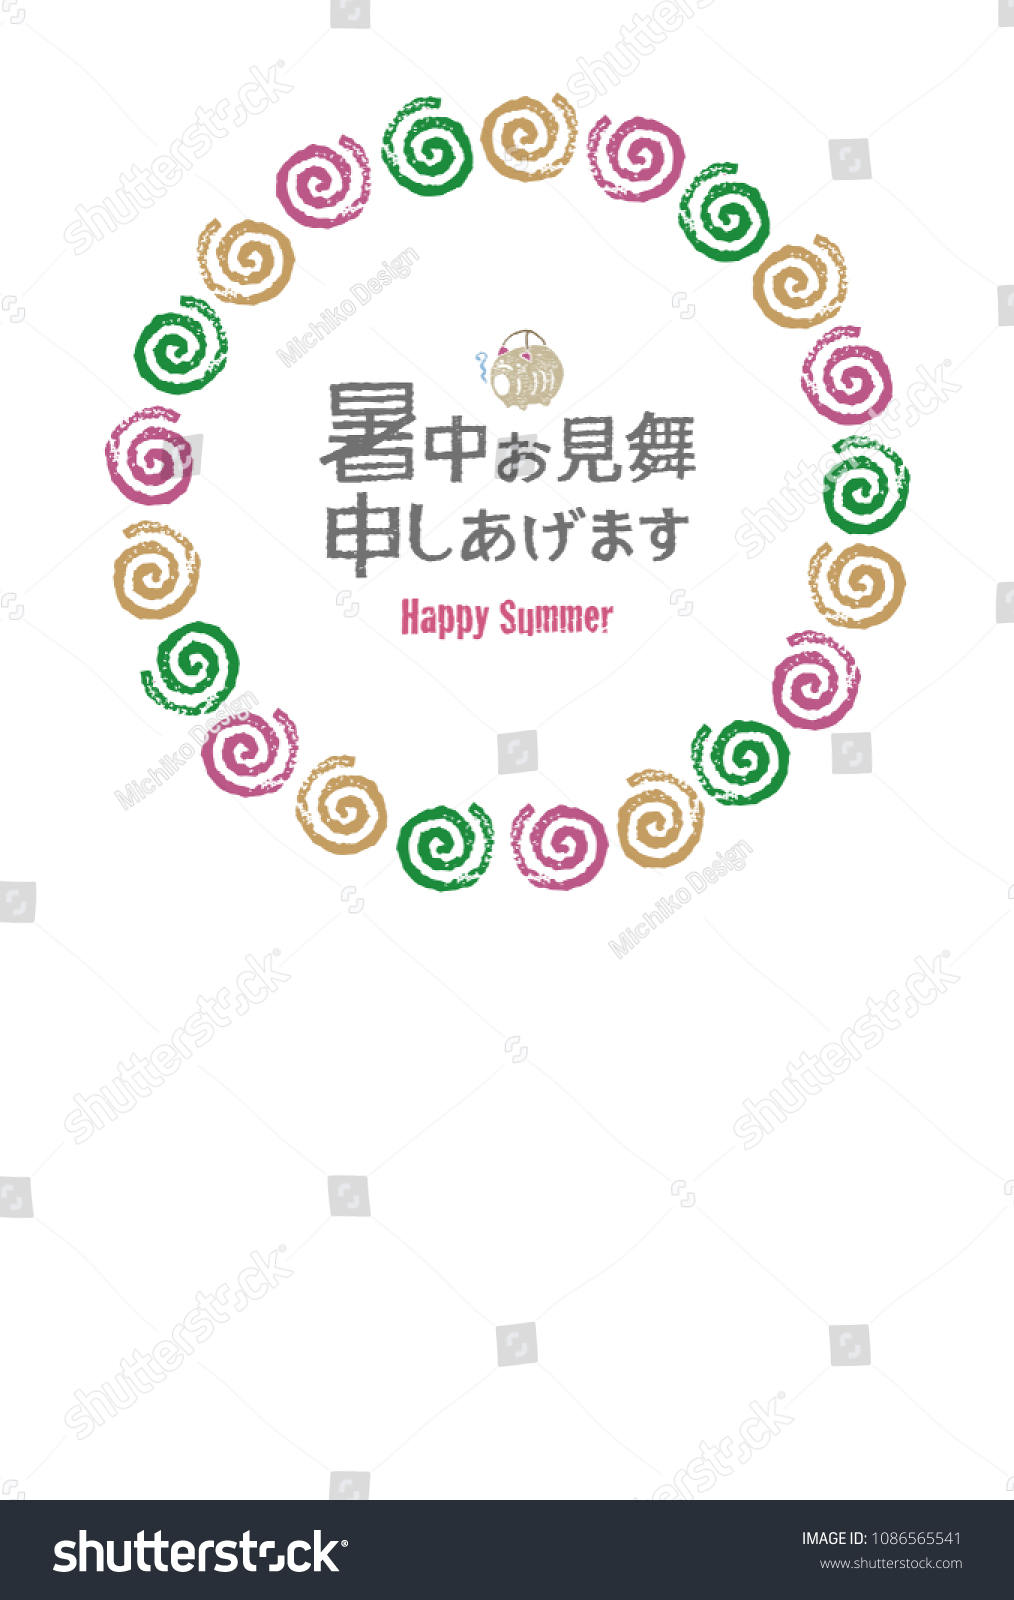 SVG of Summer greeting card with colorful mosquito coils wreath and a pig shaped holder / translation of Japanese 